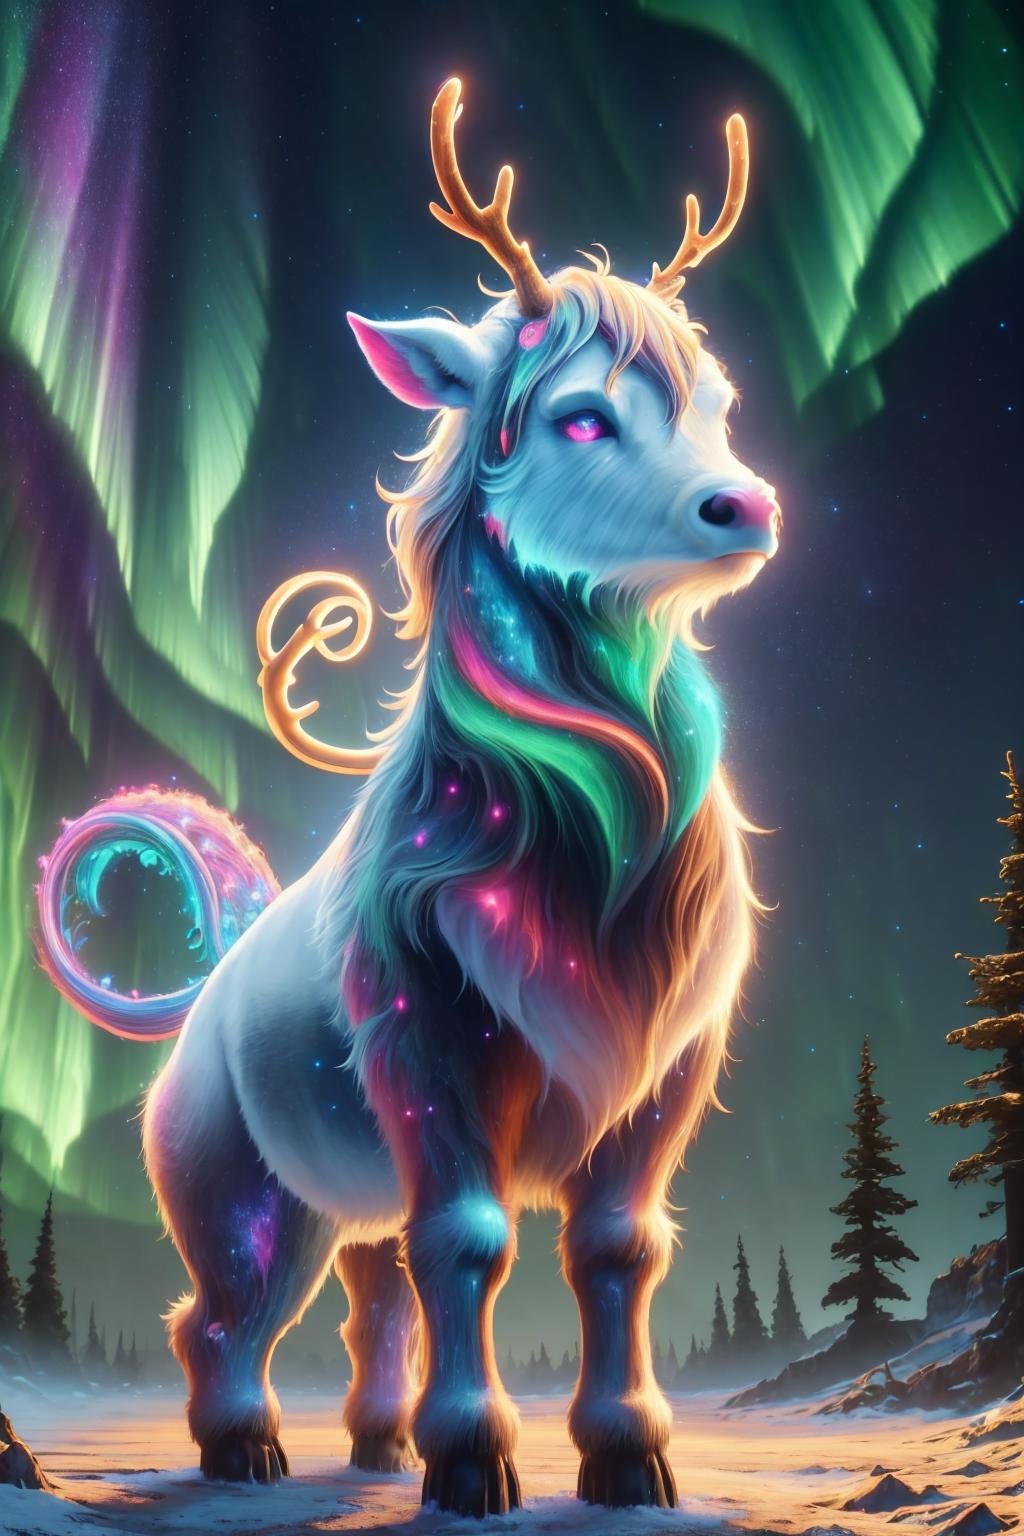 masterpiece, best quality, <lora:aurora-style-richy-v1:1> aurorastyle, reindeer, fantasy, aesthetic, mystical, godly, starry sky, ascension, magnificent, no humans